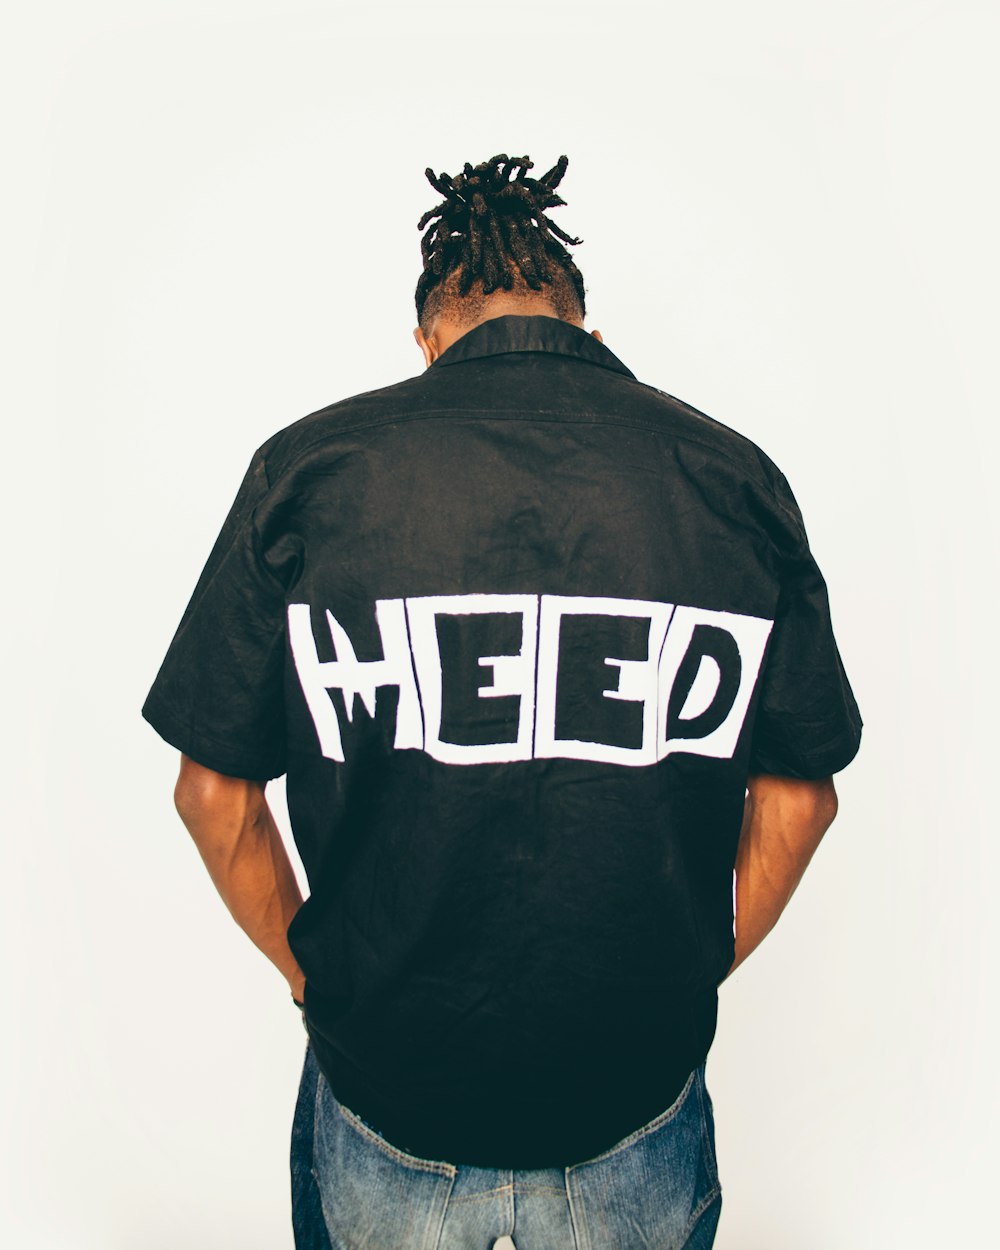 a man with dreadlocks wearing a black shirt with the word heeed on